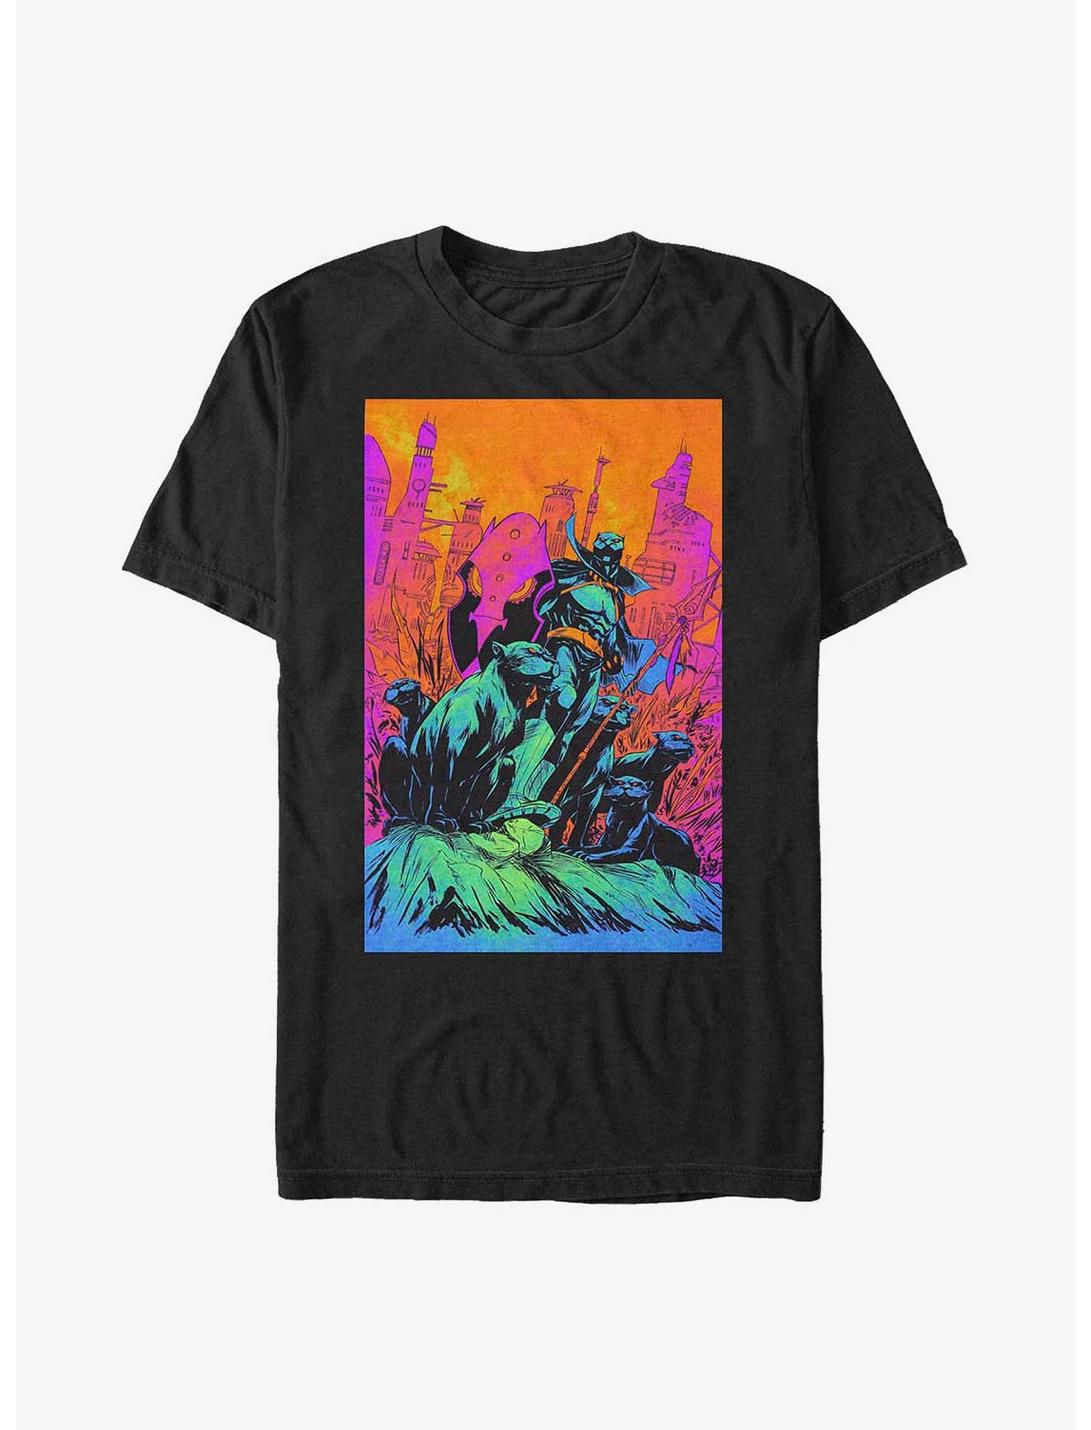 Marvel Black Panther Claw of Panthers T-Shirt, BLACK, hi-res